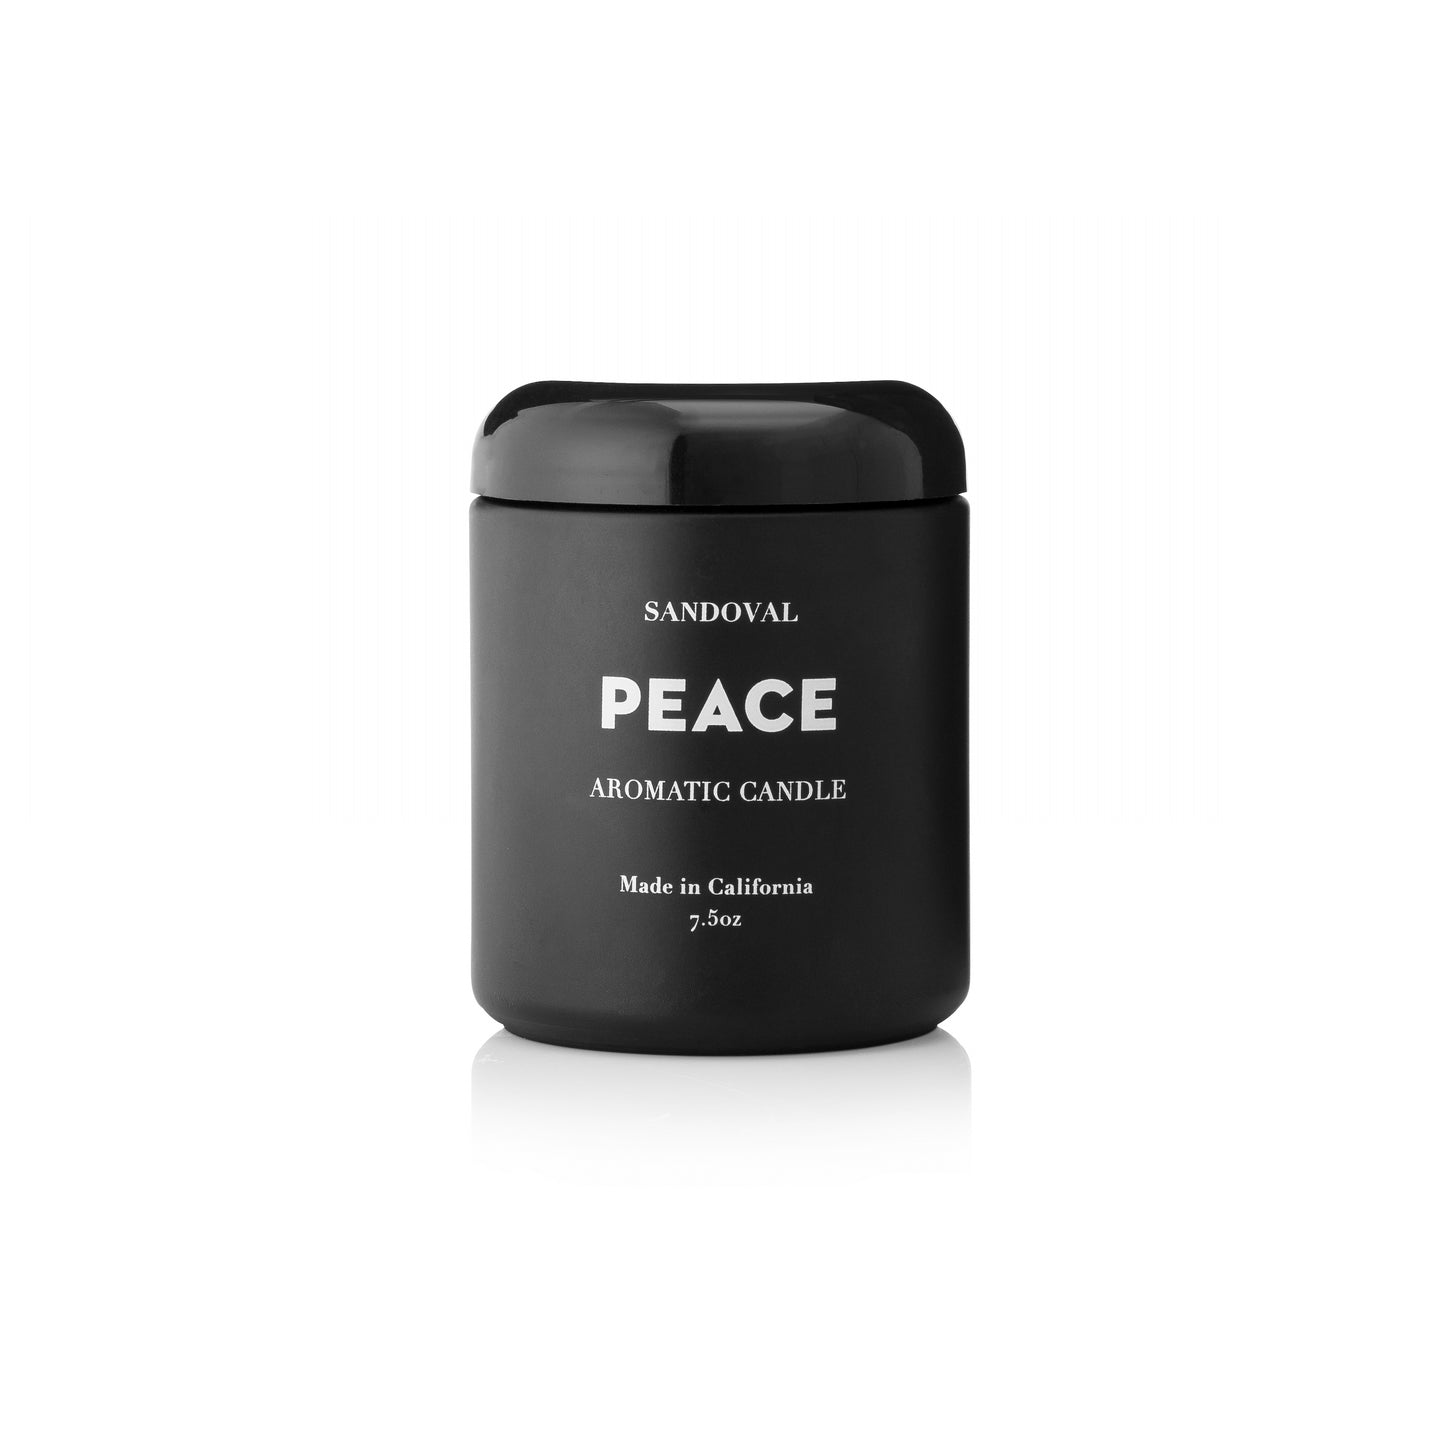 PEACE AROMATIC CANDLE